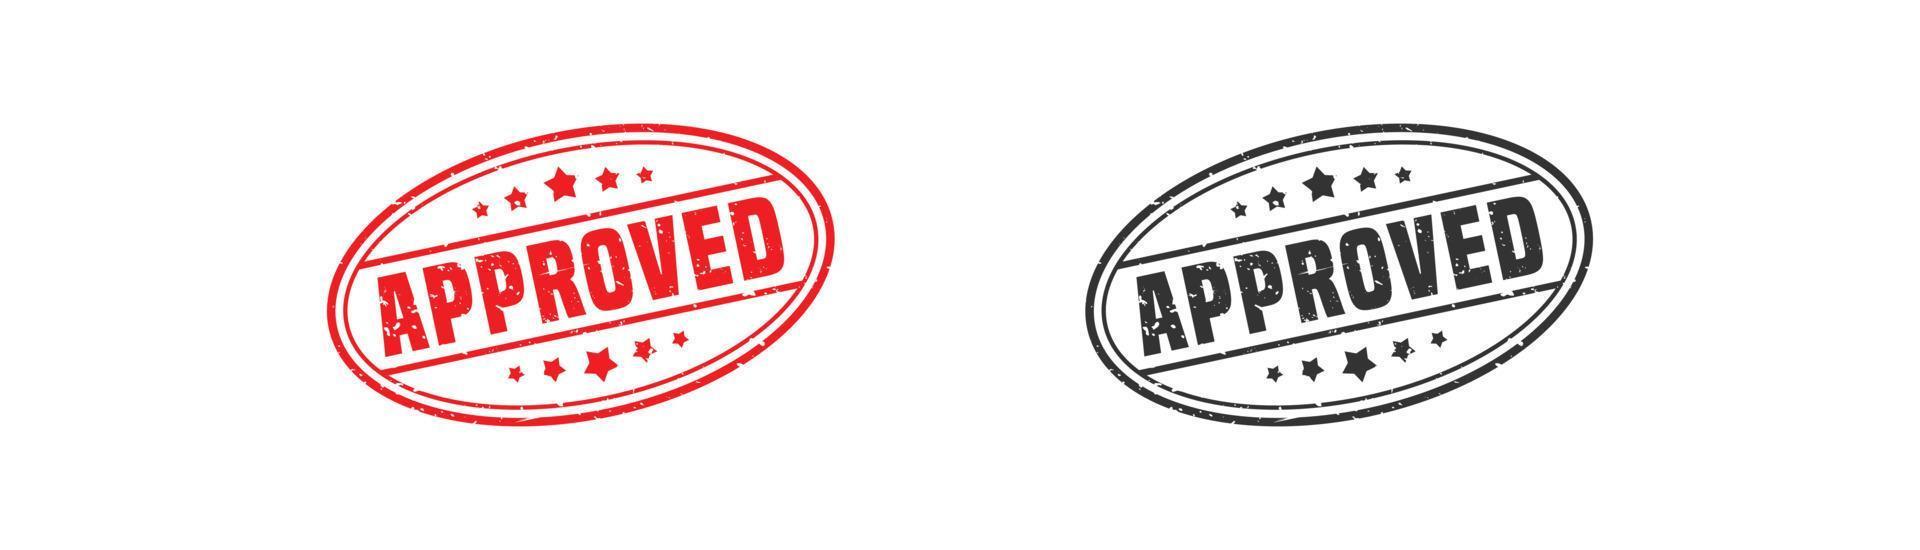 Approved stamp rubber with grunge style on white background vector